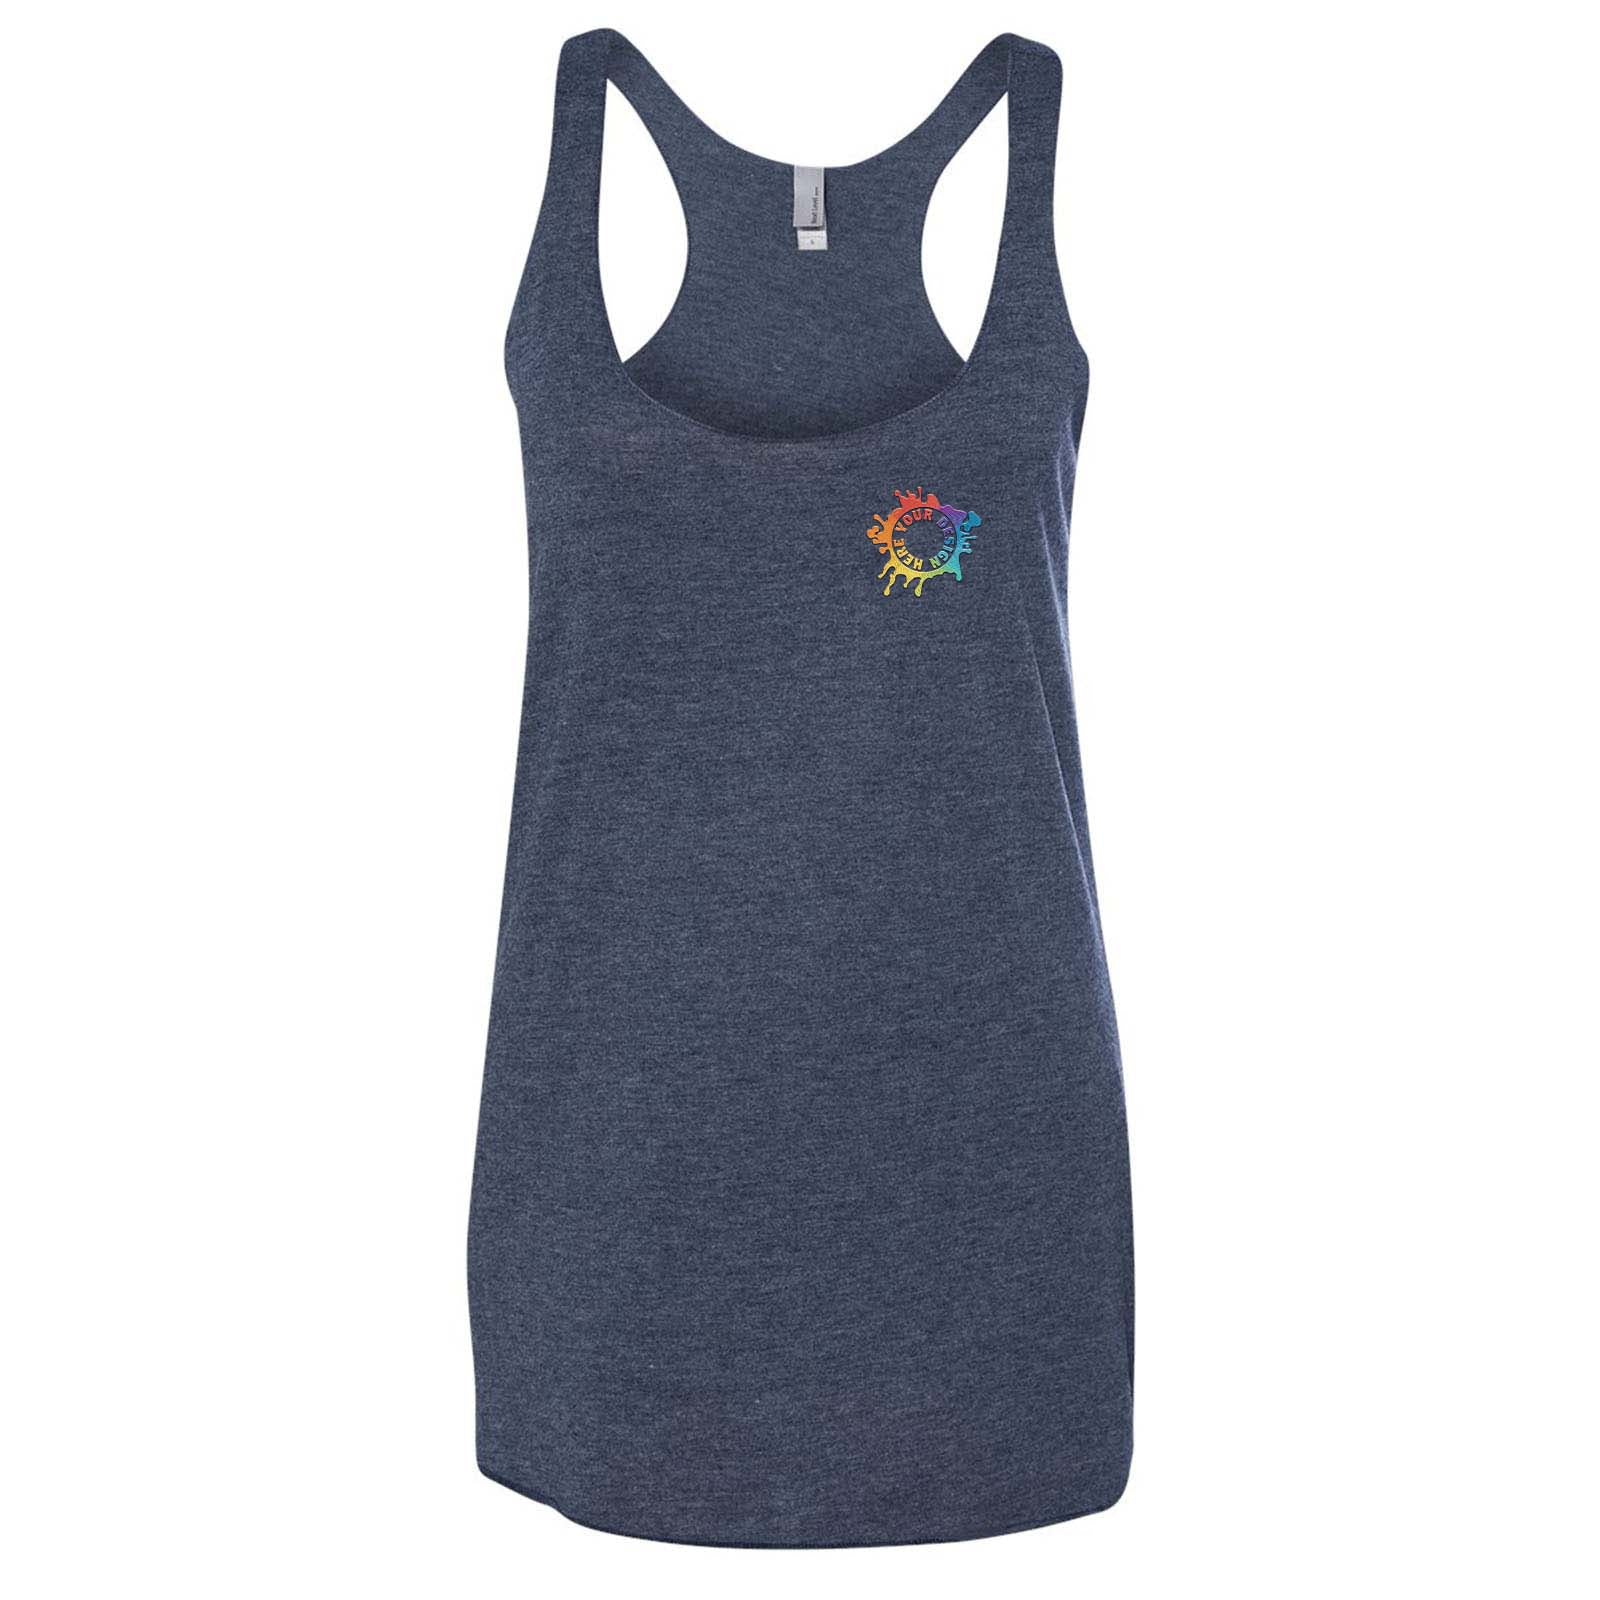 Next Level Women's Triblend Racerback Tank Top Embroidery - Mato & Hash